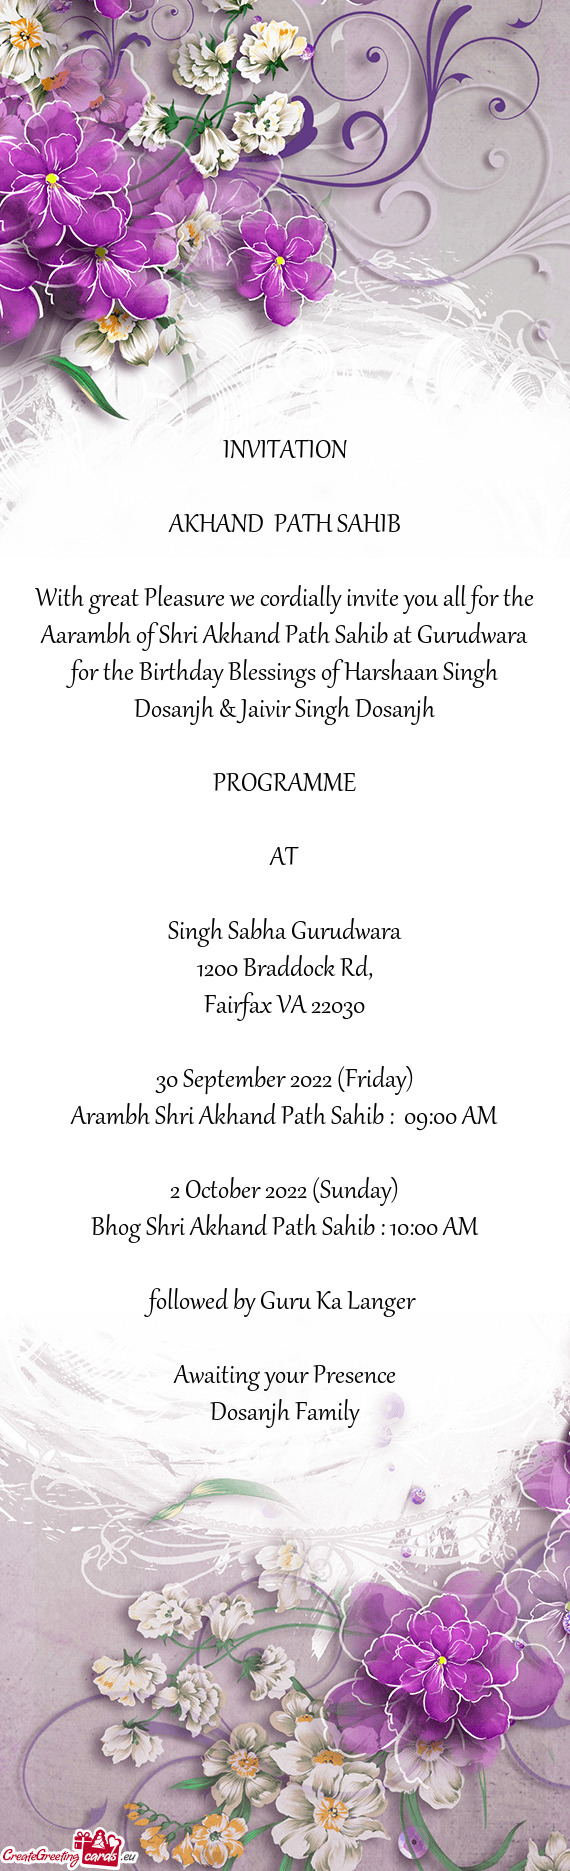 With great Pleasure we cordially invite you all for the Aarambh of Shri Akhand Path Sahib at Gurudwa